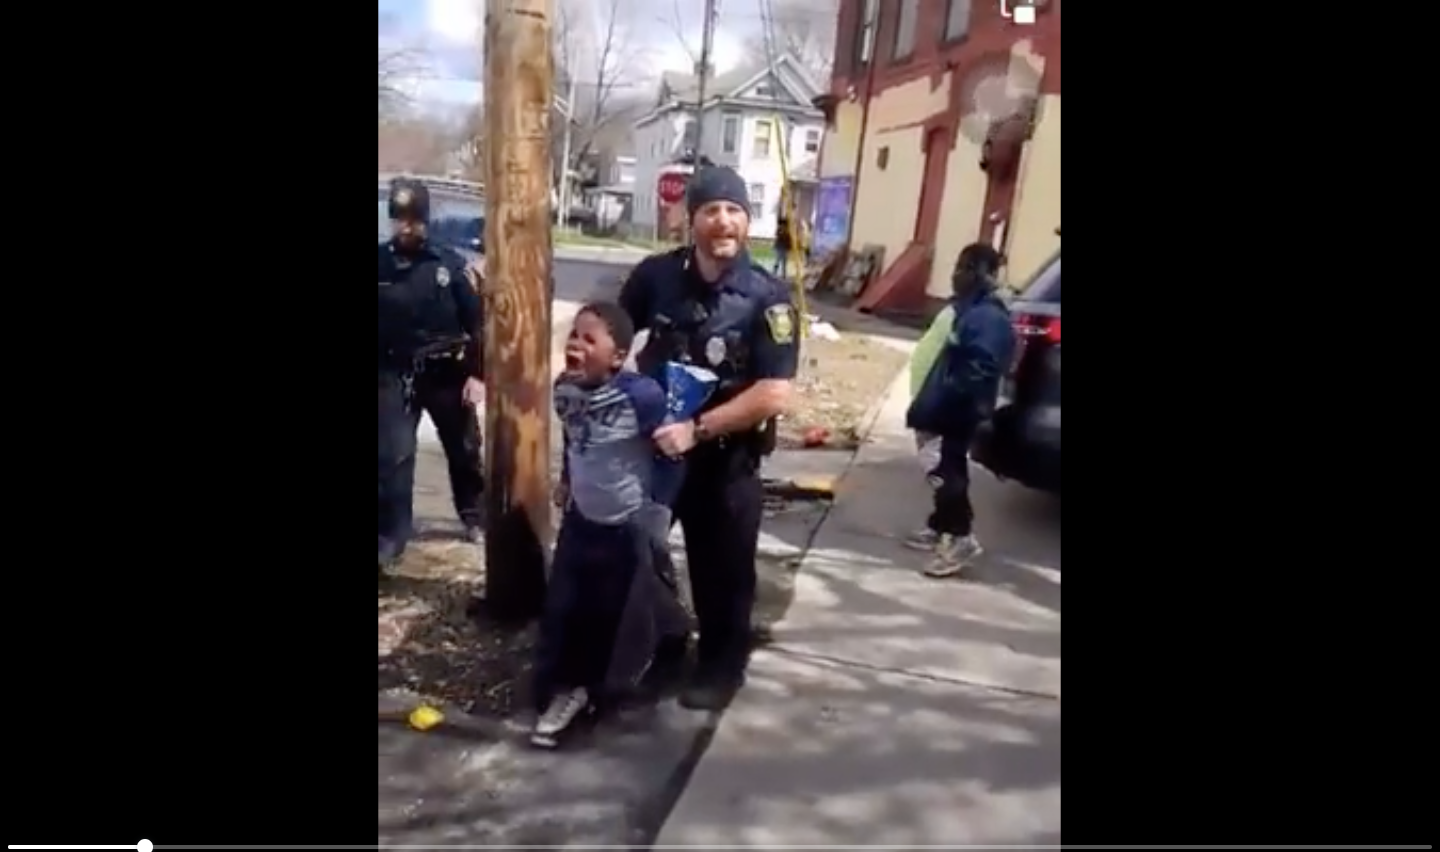 An 8-year-old boy in Syracuse was filmed by bystanders as officers grabbed him from his bike after he allegedly stole a bag of chips. No charges were pressed.